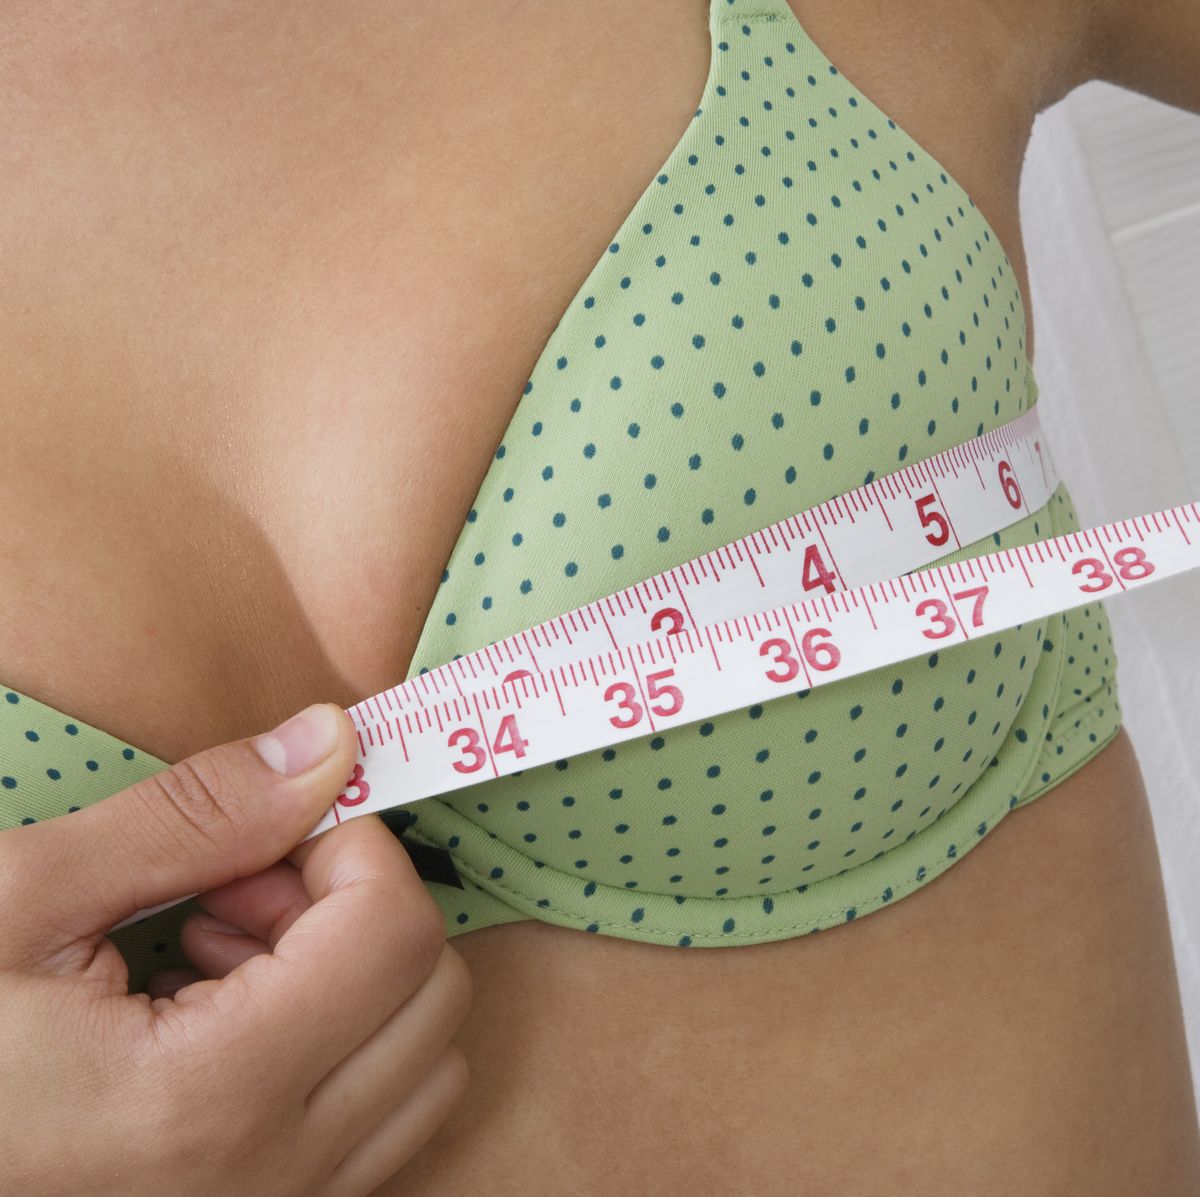 This “ Bra” actually works for BIG breast!!! real Demonstration